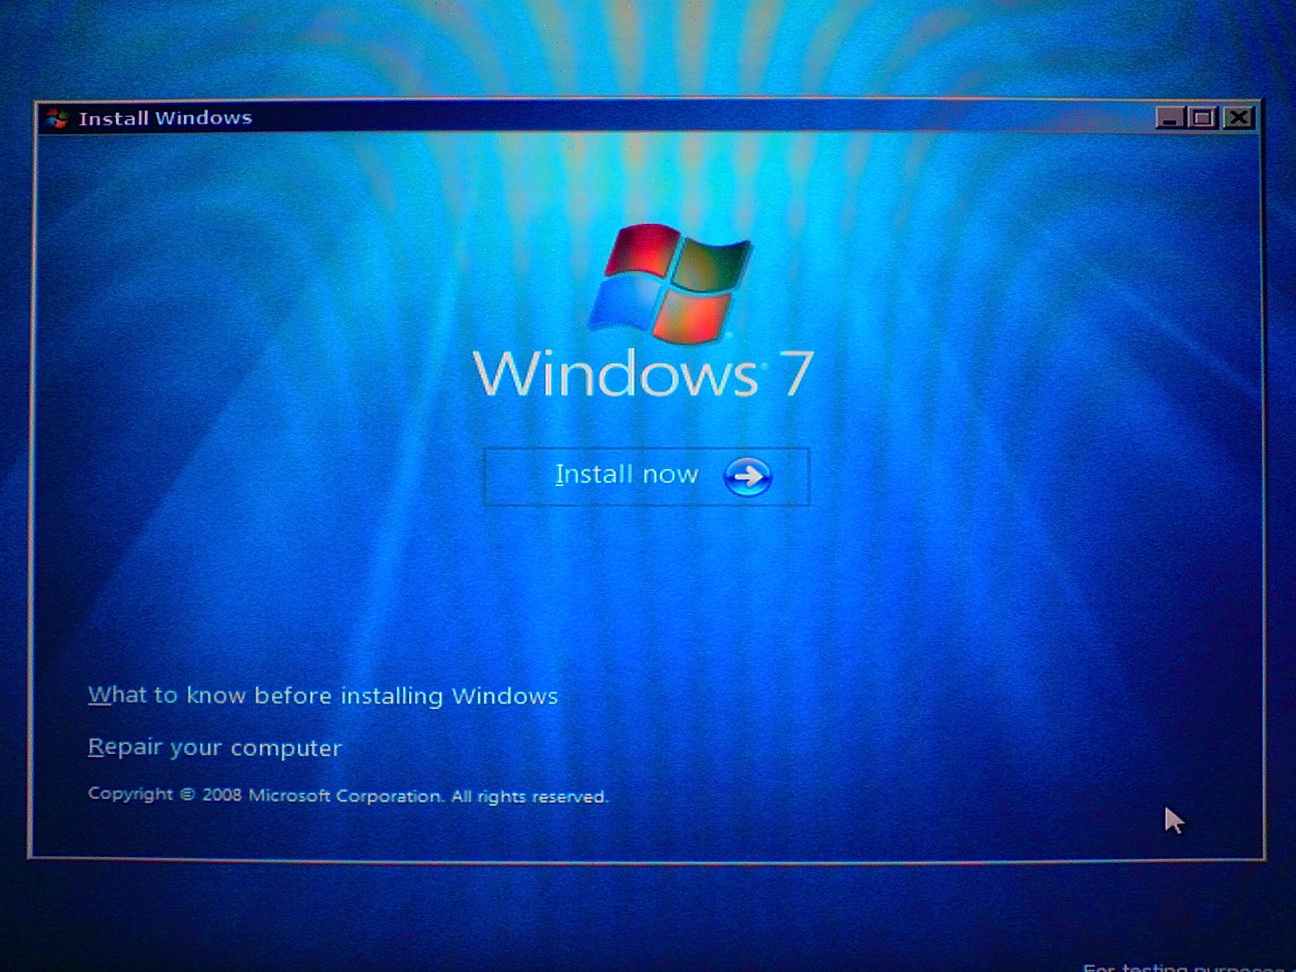 How to Install Windows 7 on Your Mac Using Boot Camp